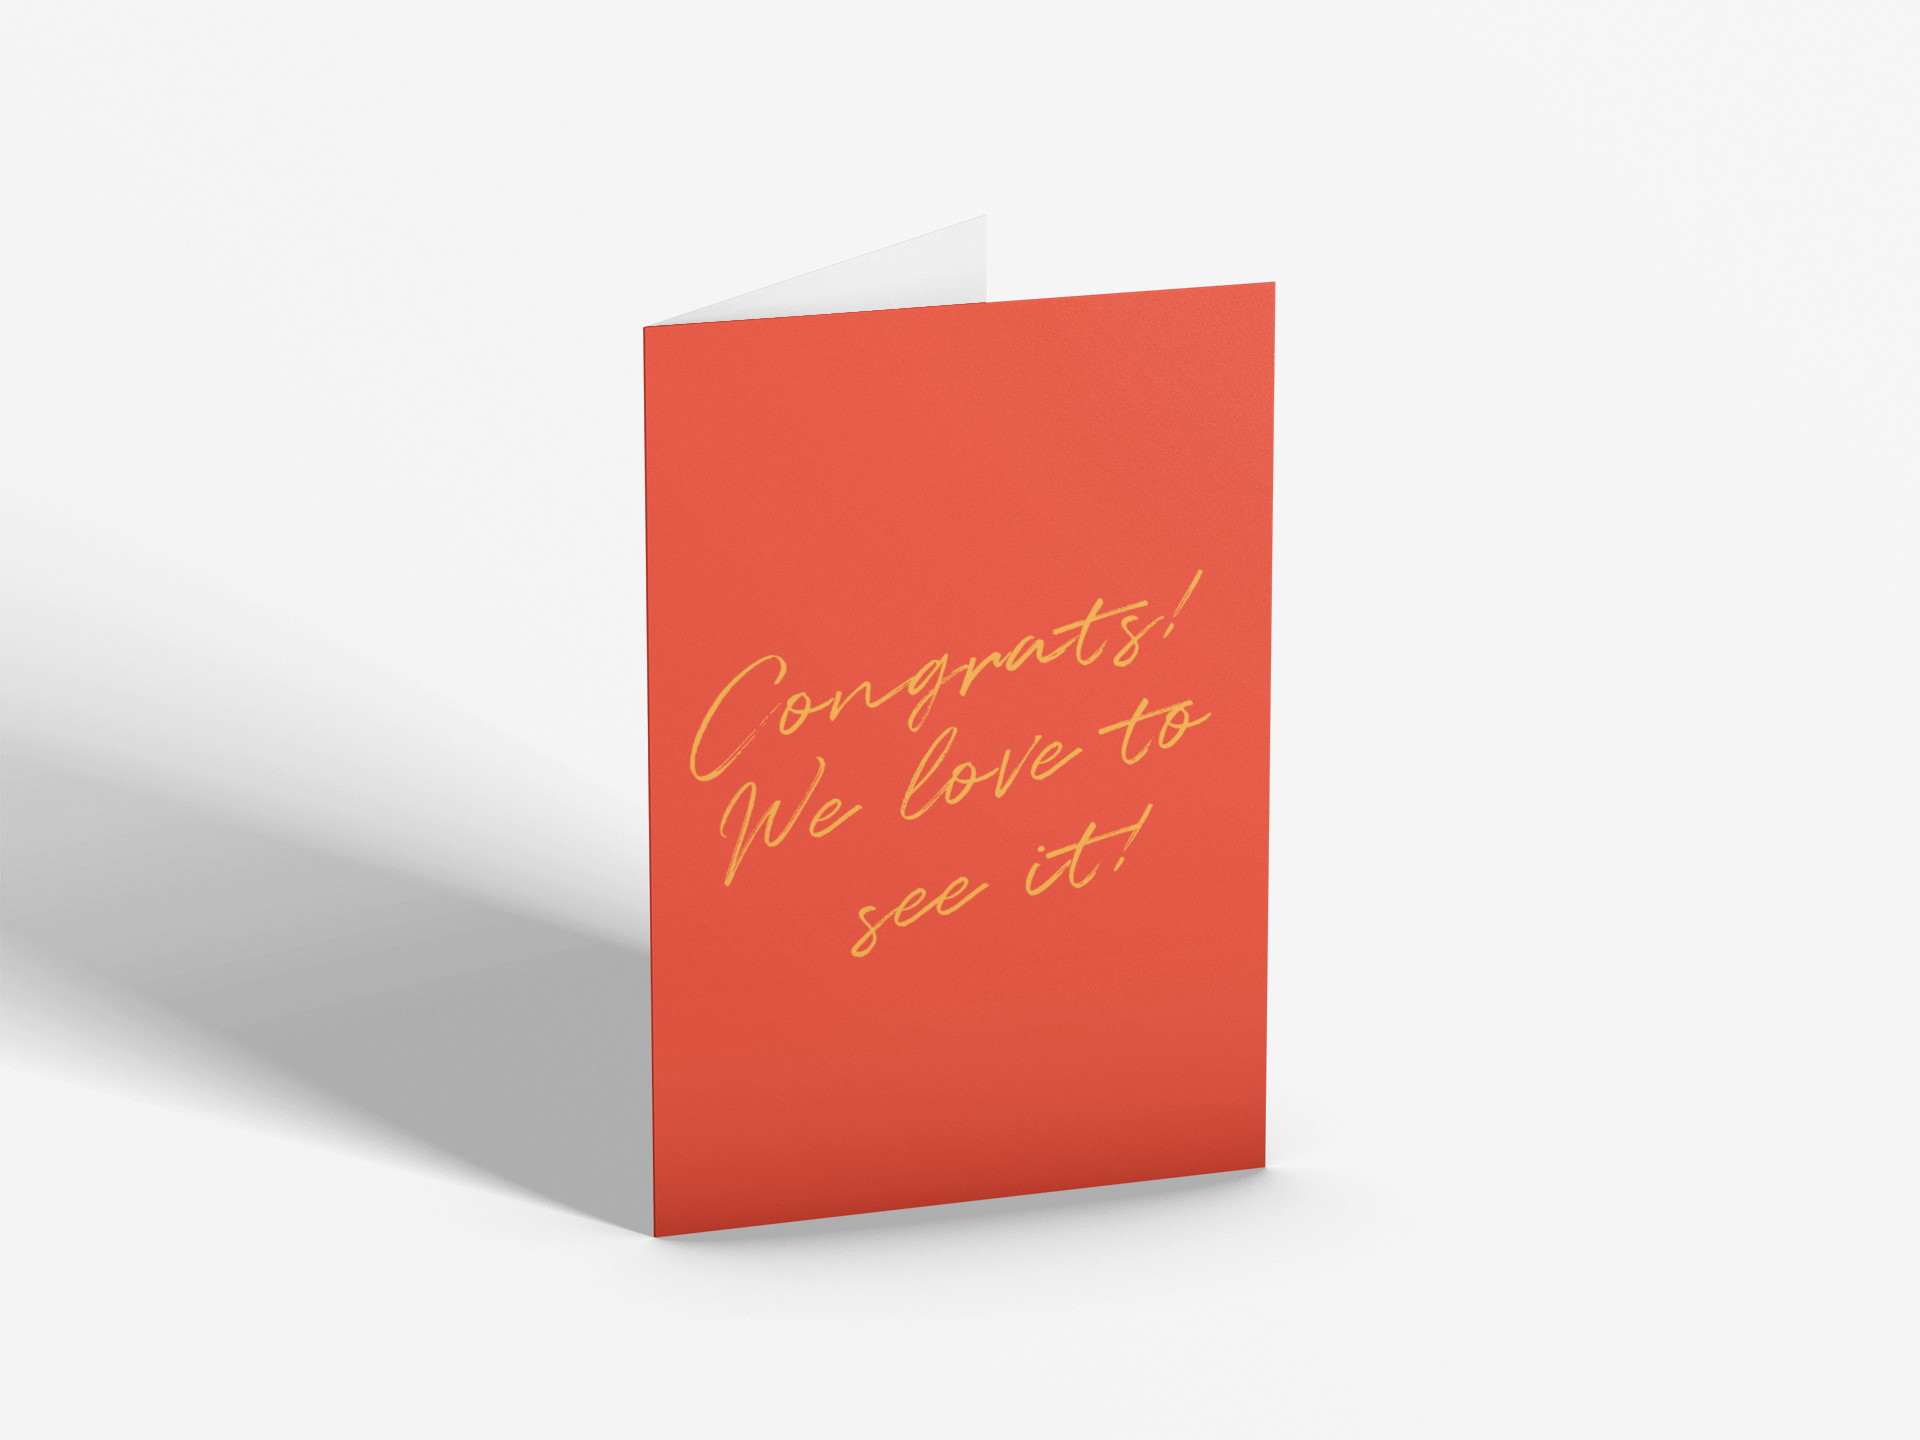 Congrats! We Love To See It | Greetings Card